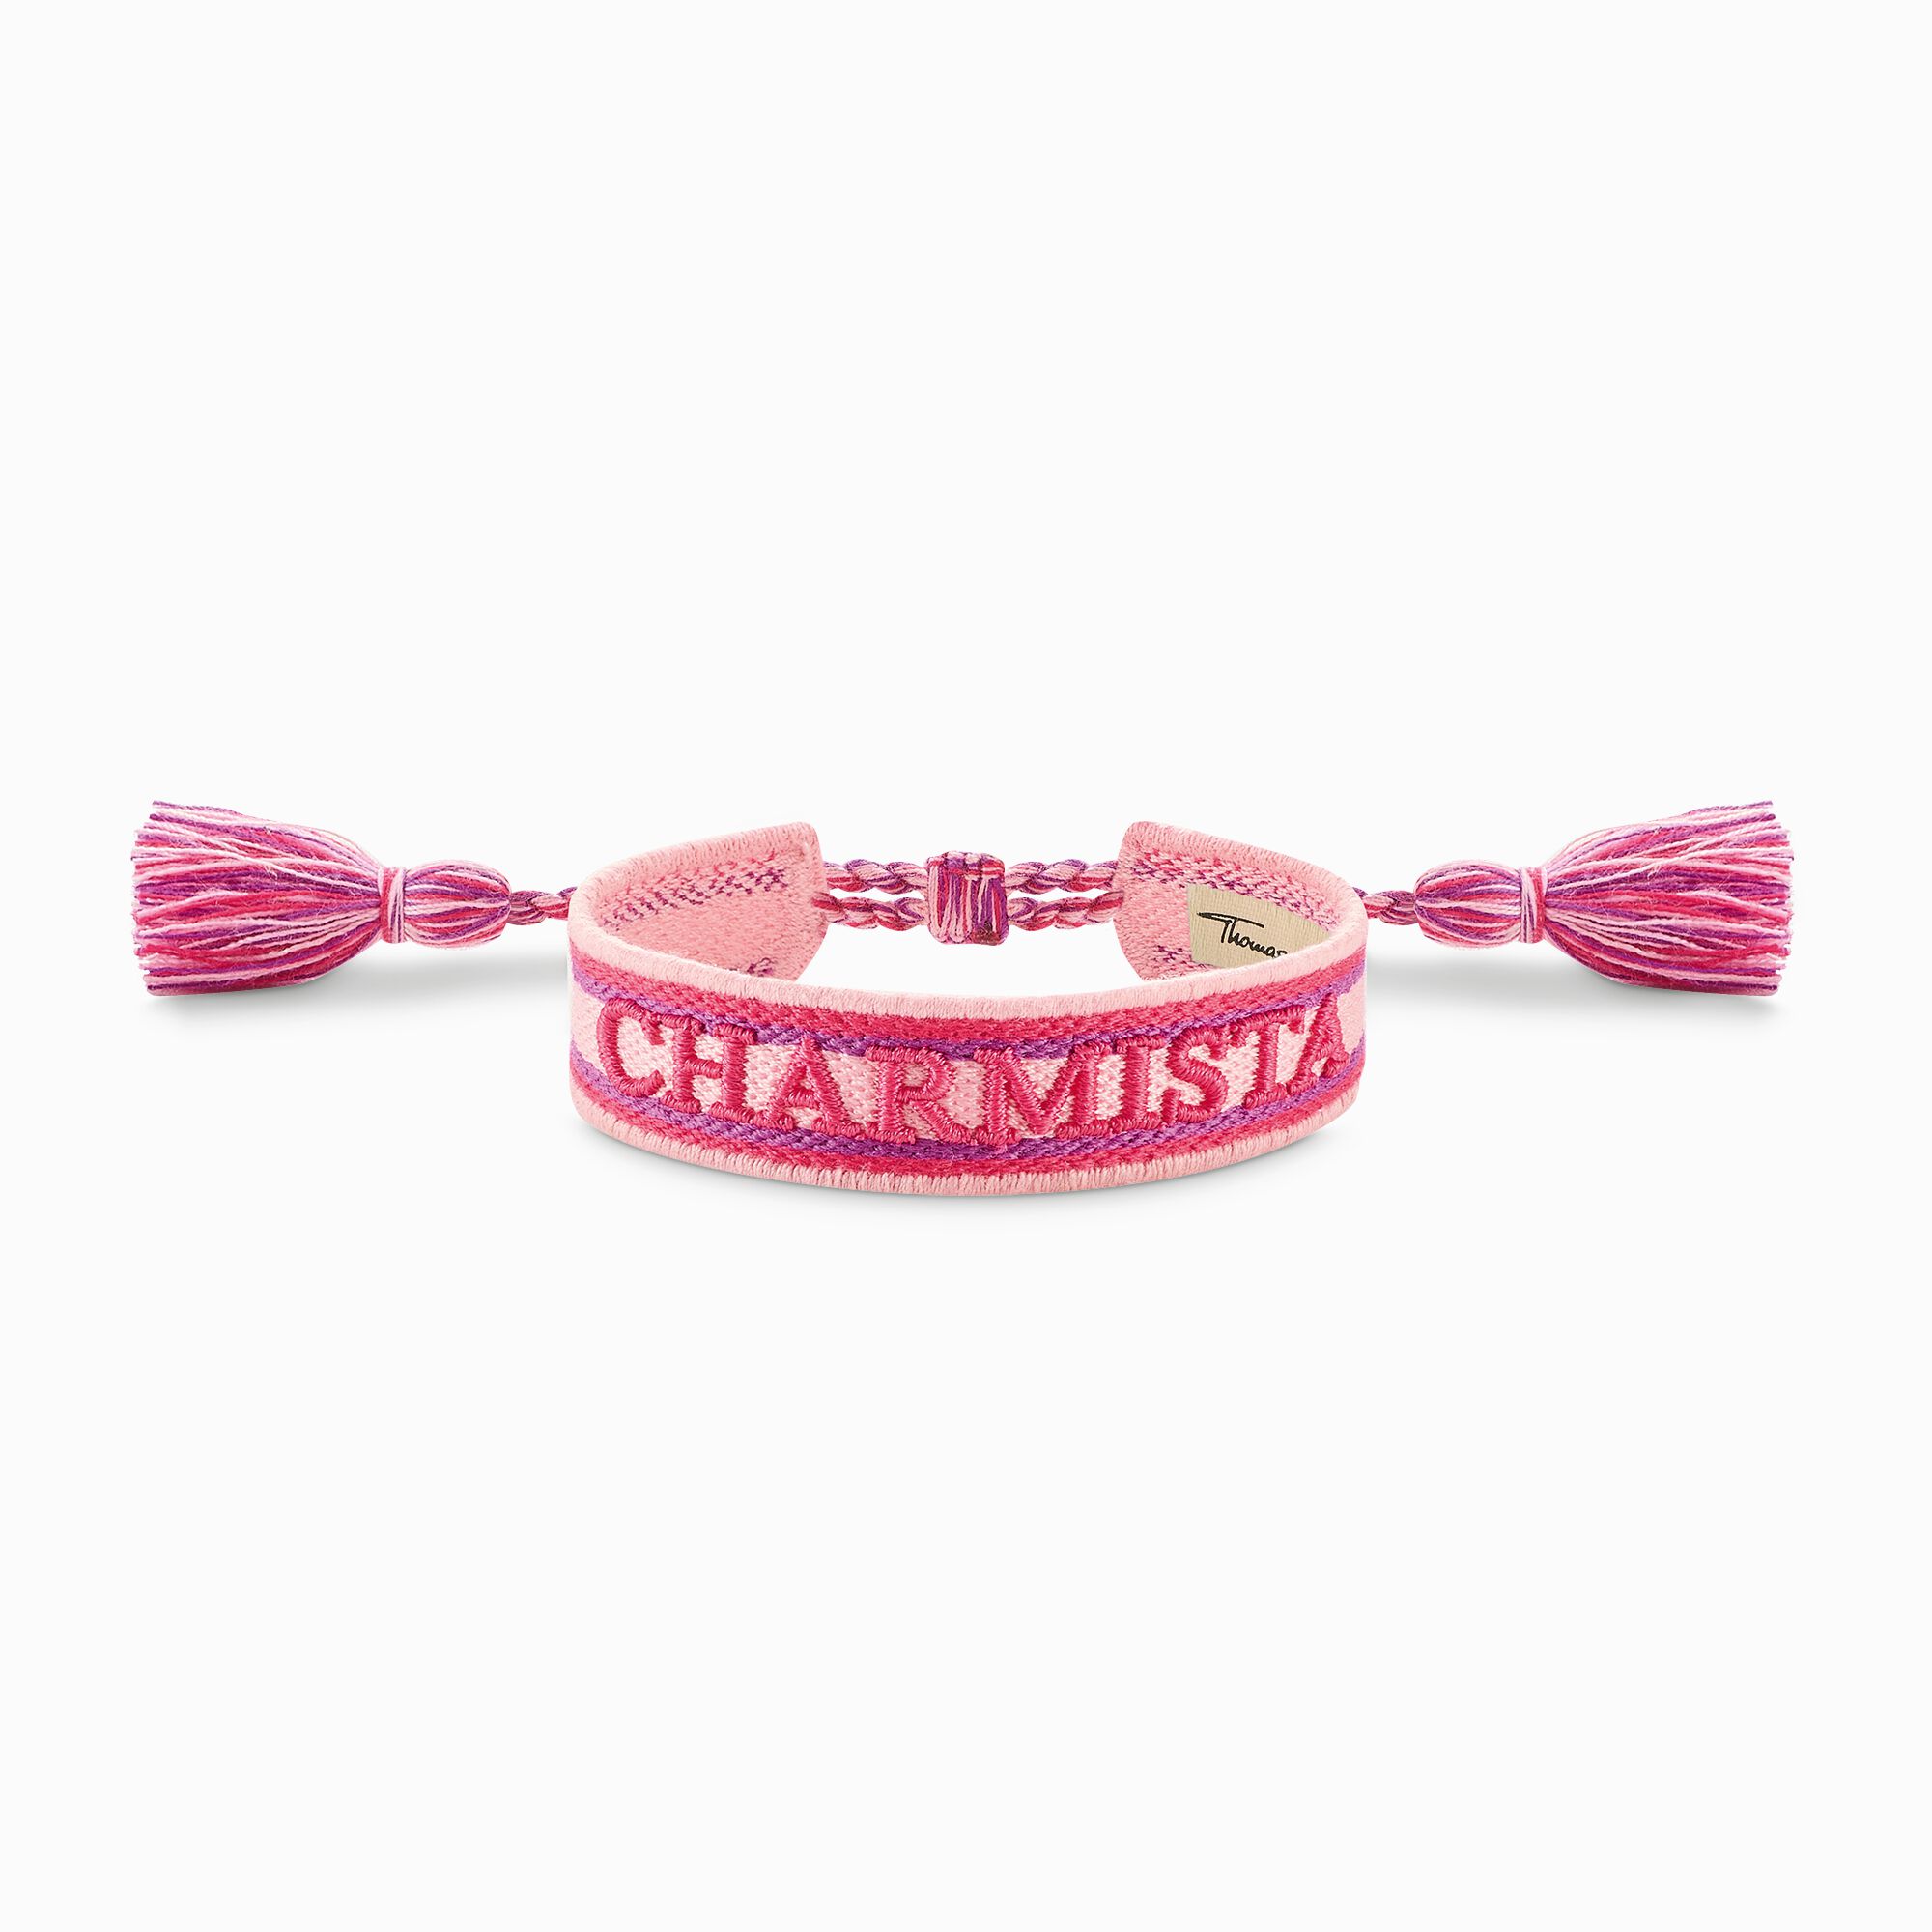 Woven bracelet CHARMISTA in soft pink, pink &amp; purple from the Charming Collection collection in the THOMAS SABO online store